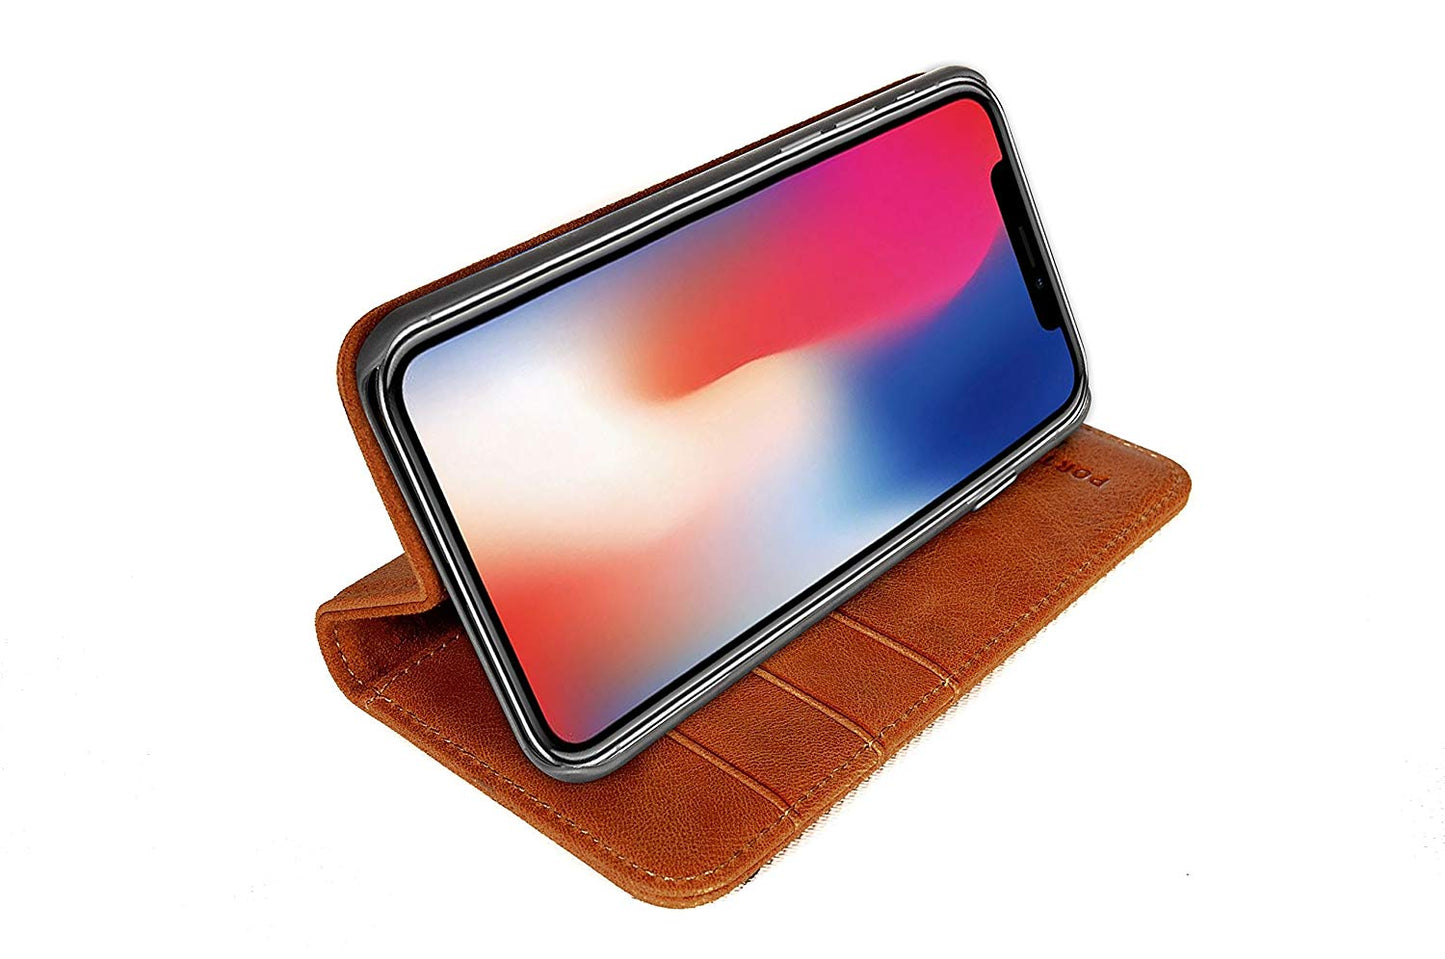 iPhone XR Leather Case. Premium Slim Genuine Leather Stand Case/Cover/Wallet (Tan)